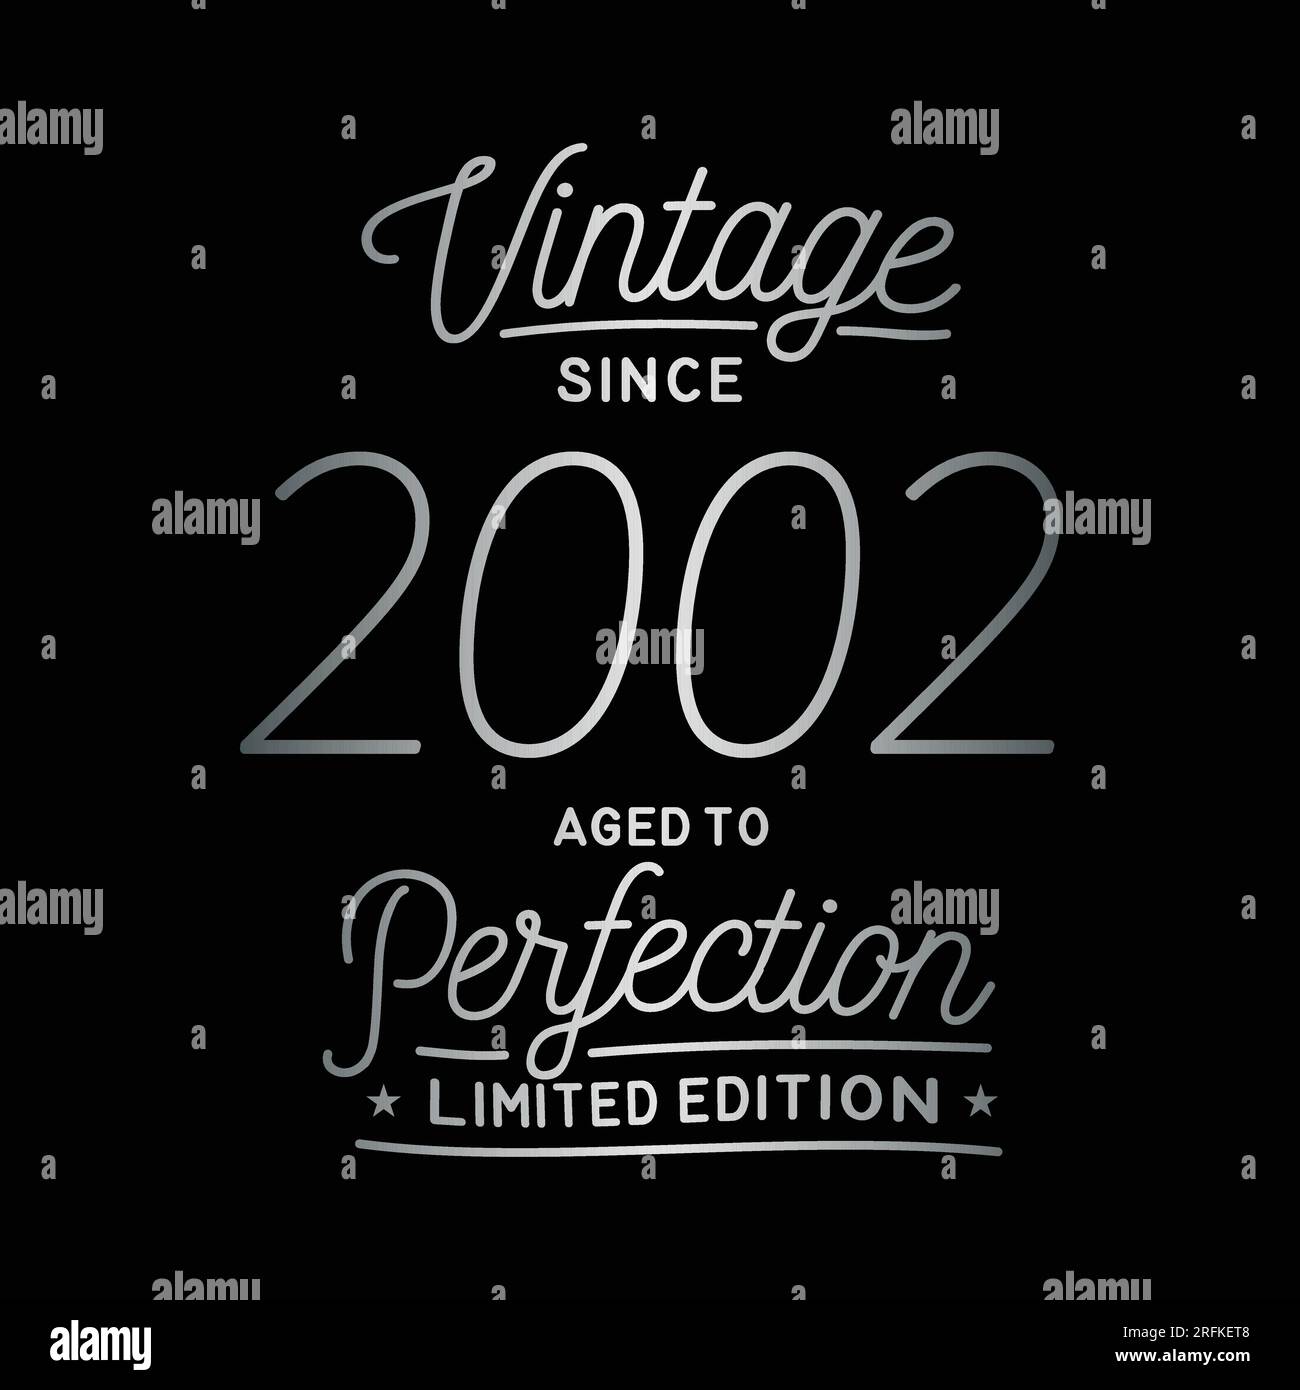 Vintage Since 2002. Aged to perfection. Authentic T-Shirt Design. Vector and Illustration Stock Vector